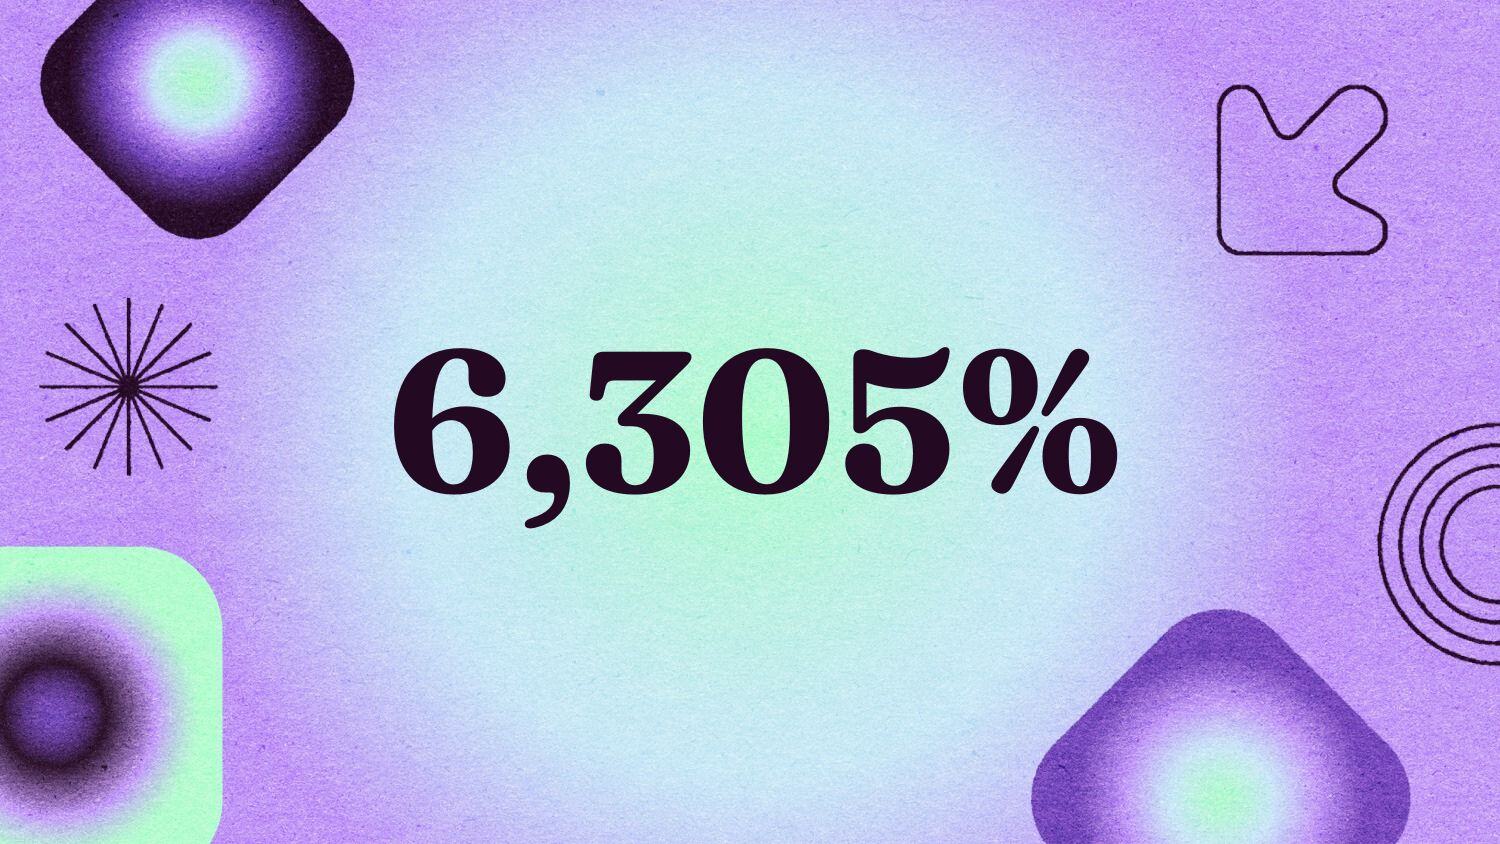 Graphic showing the number '6,305%' 